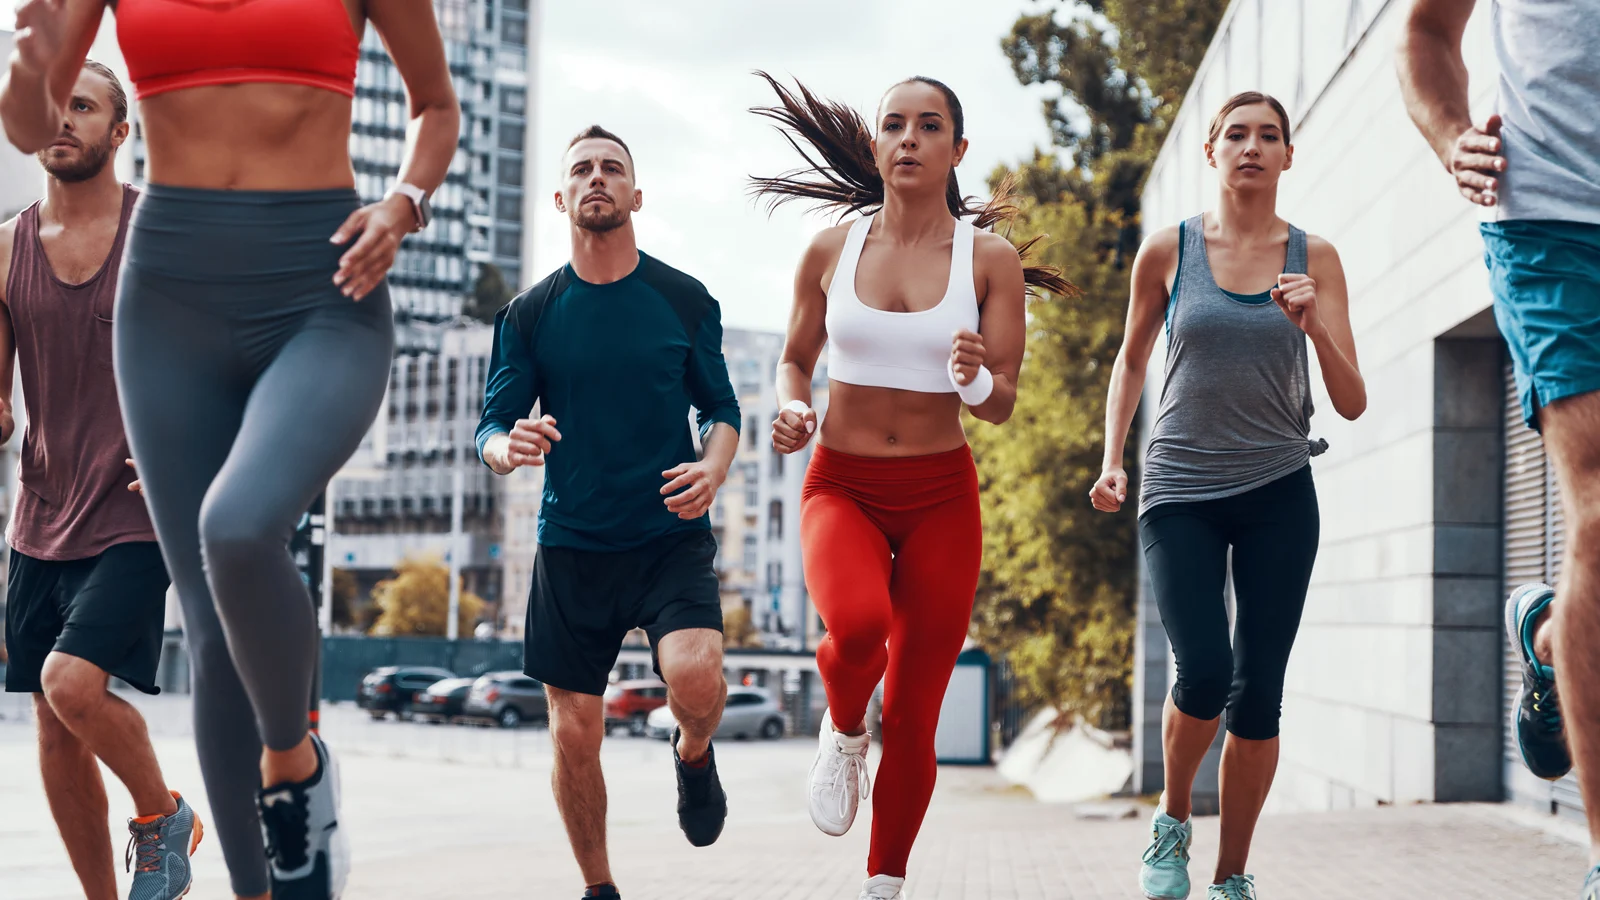 Train with others to improve your running